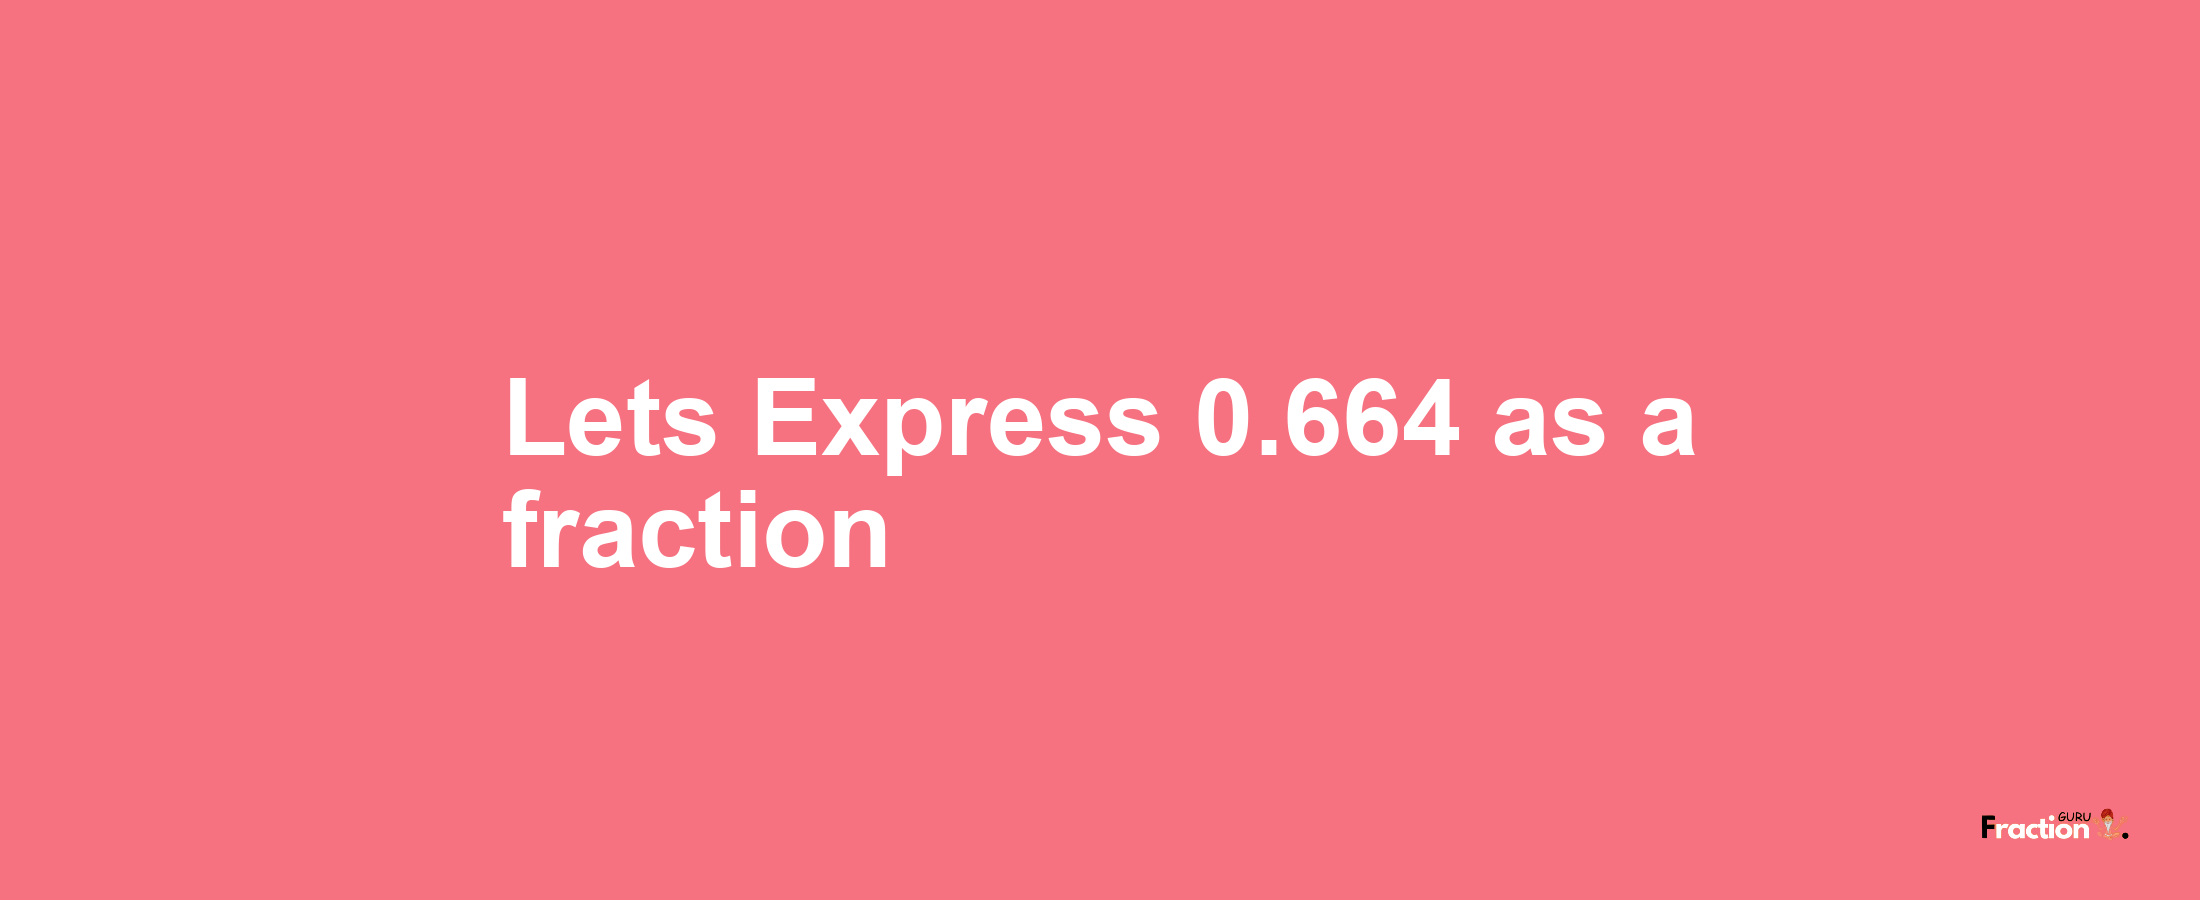 Lets Express 0.664 as afraction